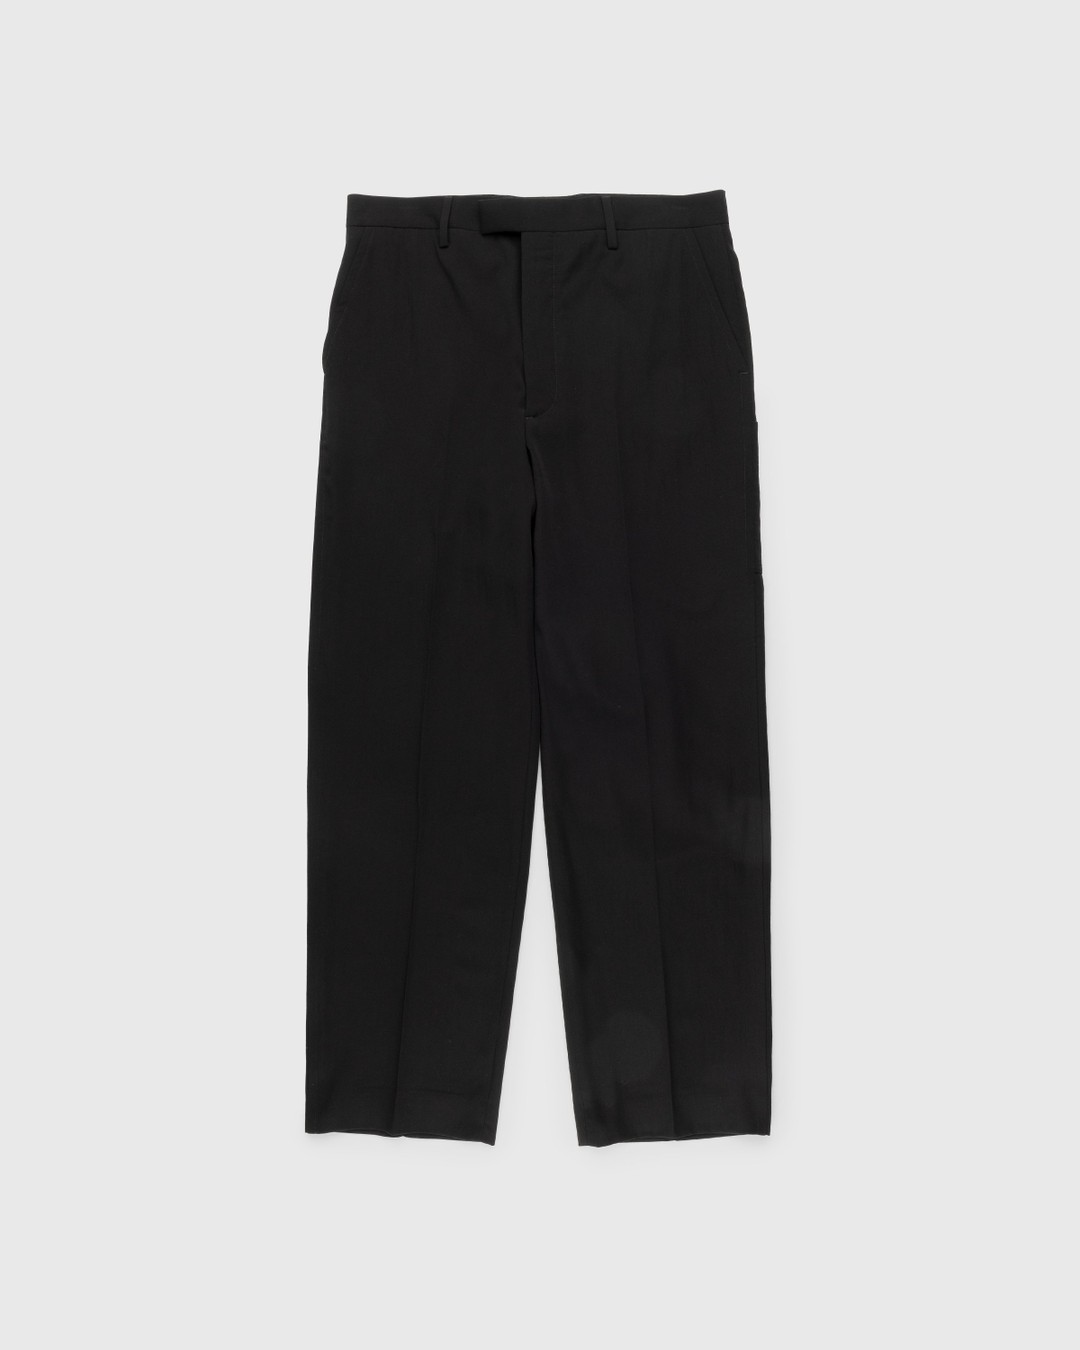 Diomene by Damir Doma – Classic pants Meteorite - Trousers - Black - Image 1